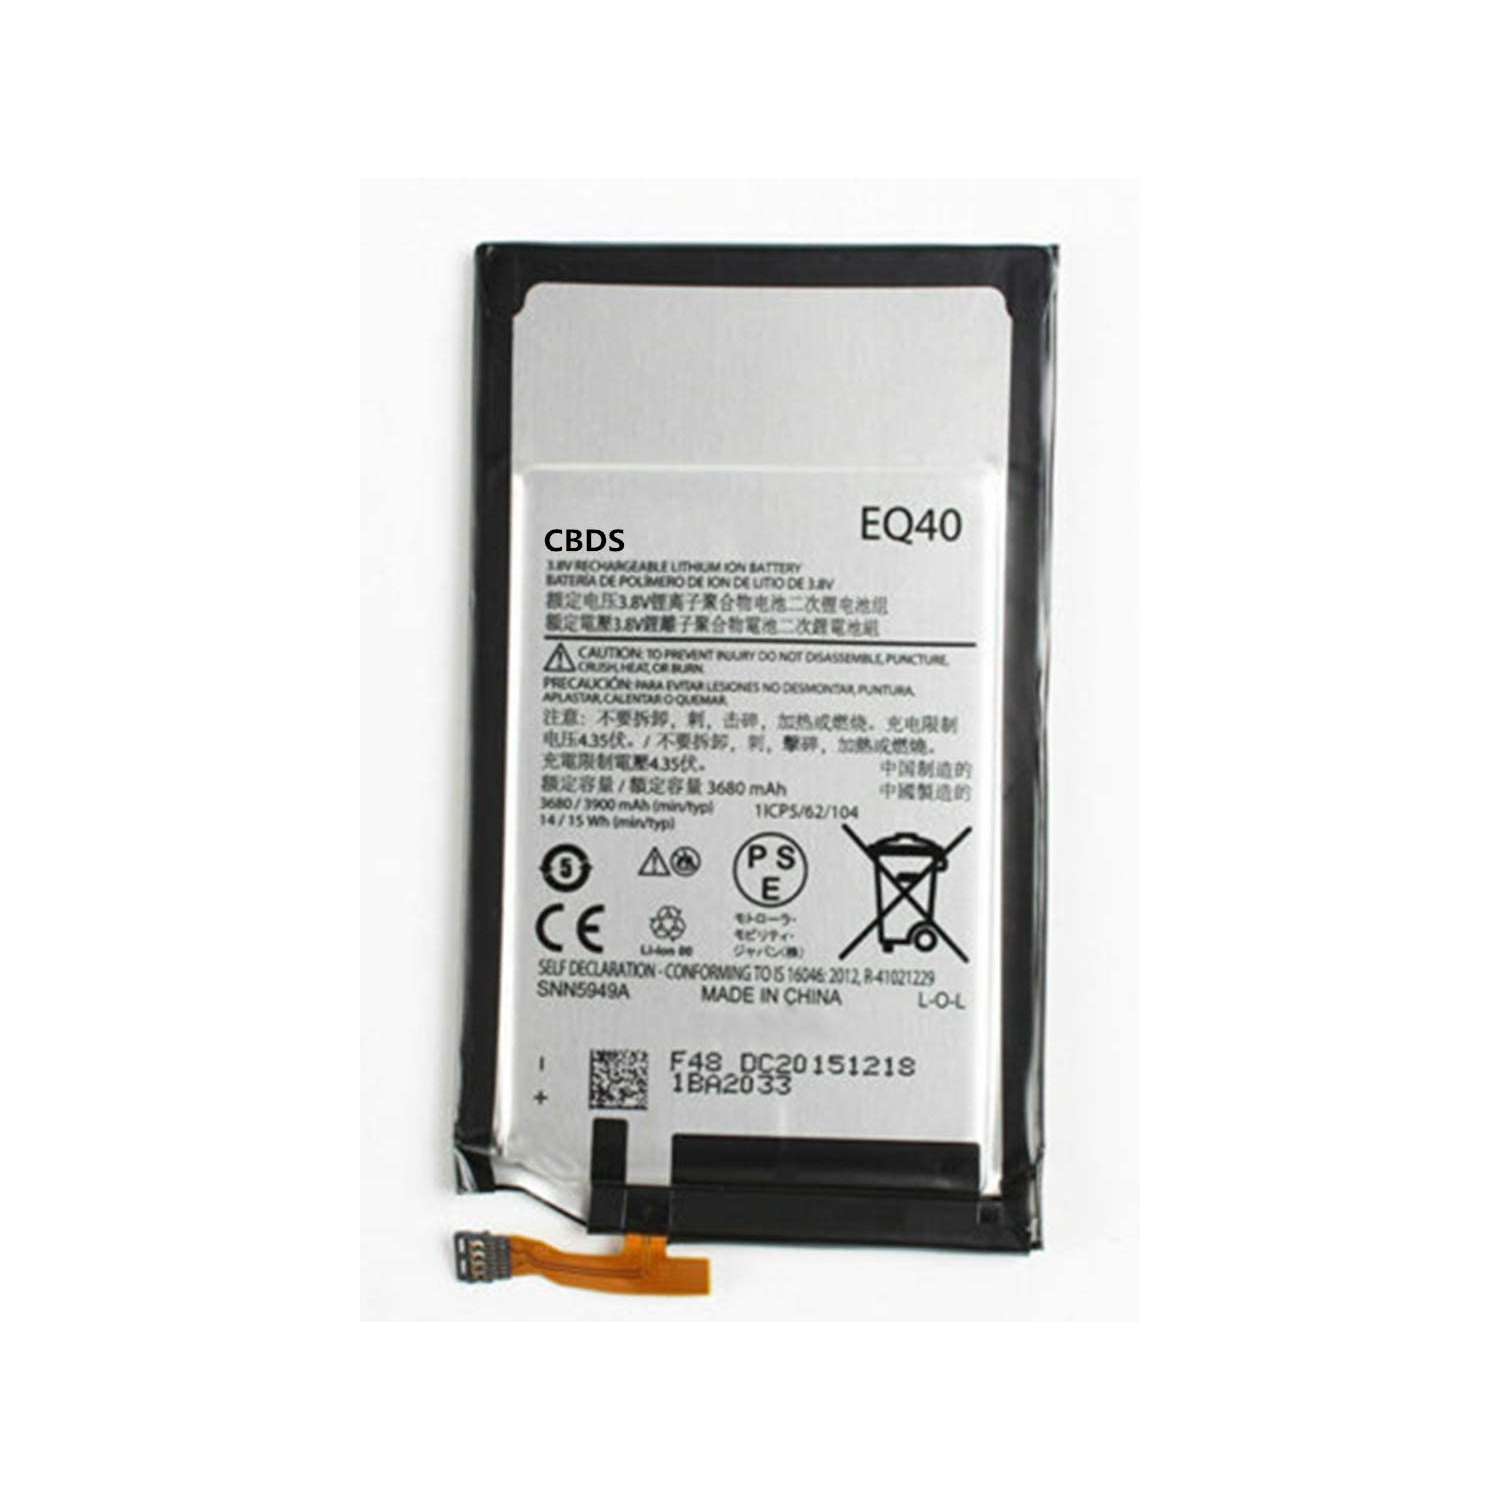 (CBDS) 3680mAh, 14.0 Wh Replacement Battery - Compatible with Motorola Droid Turbo XT1254 XT1225 XT1250 EQ40 in